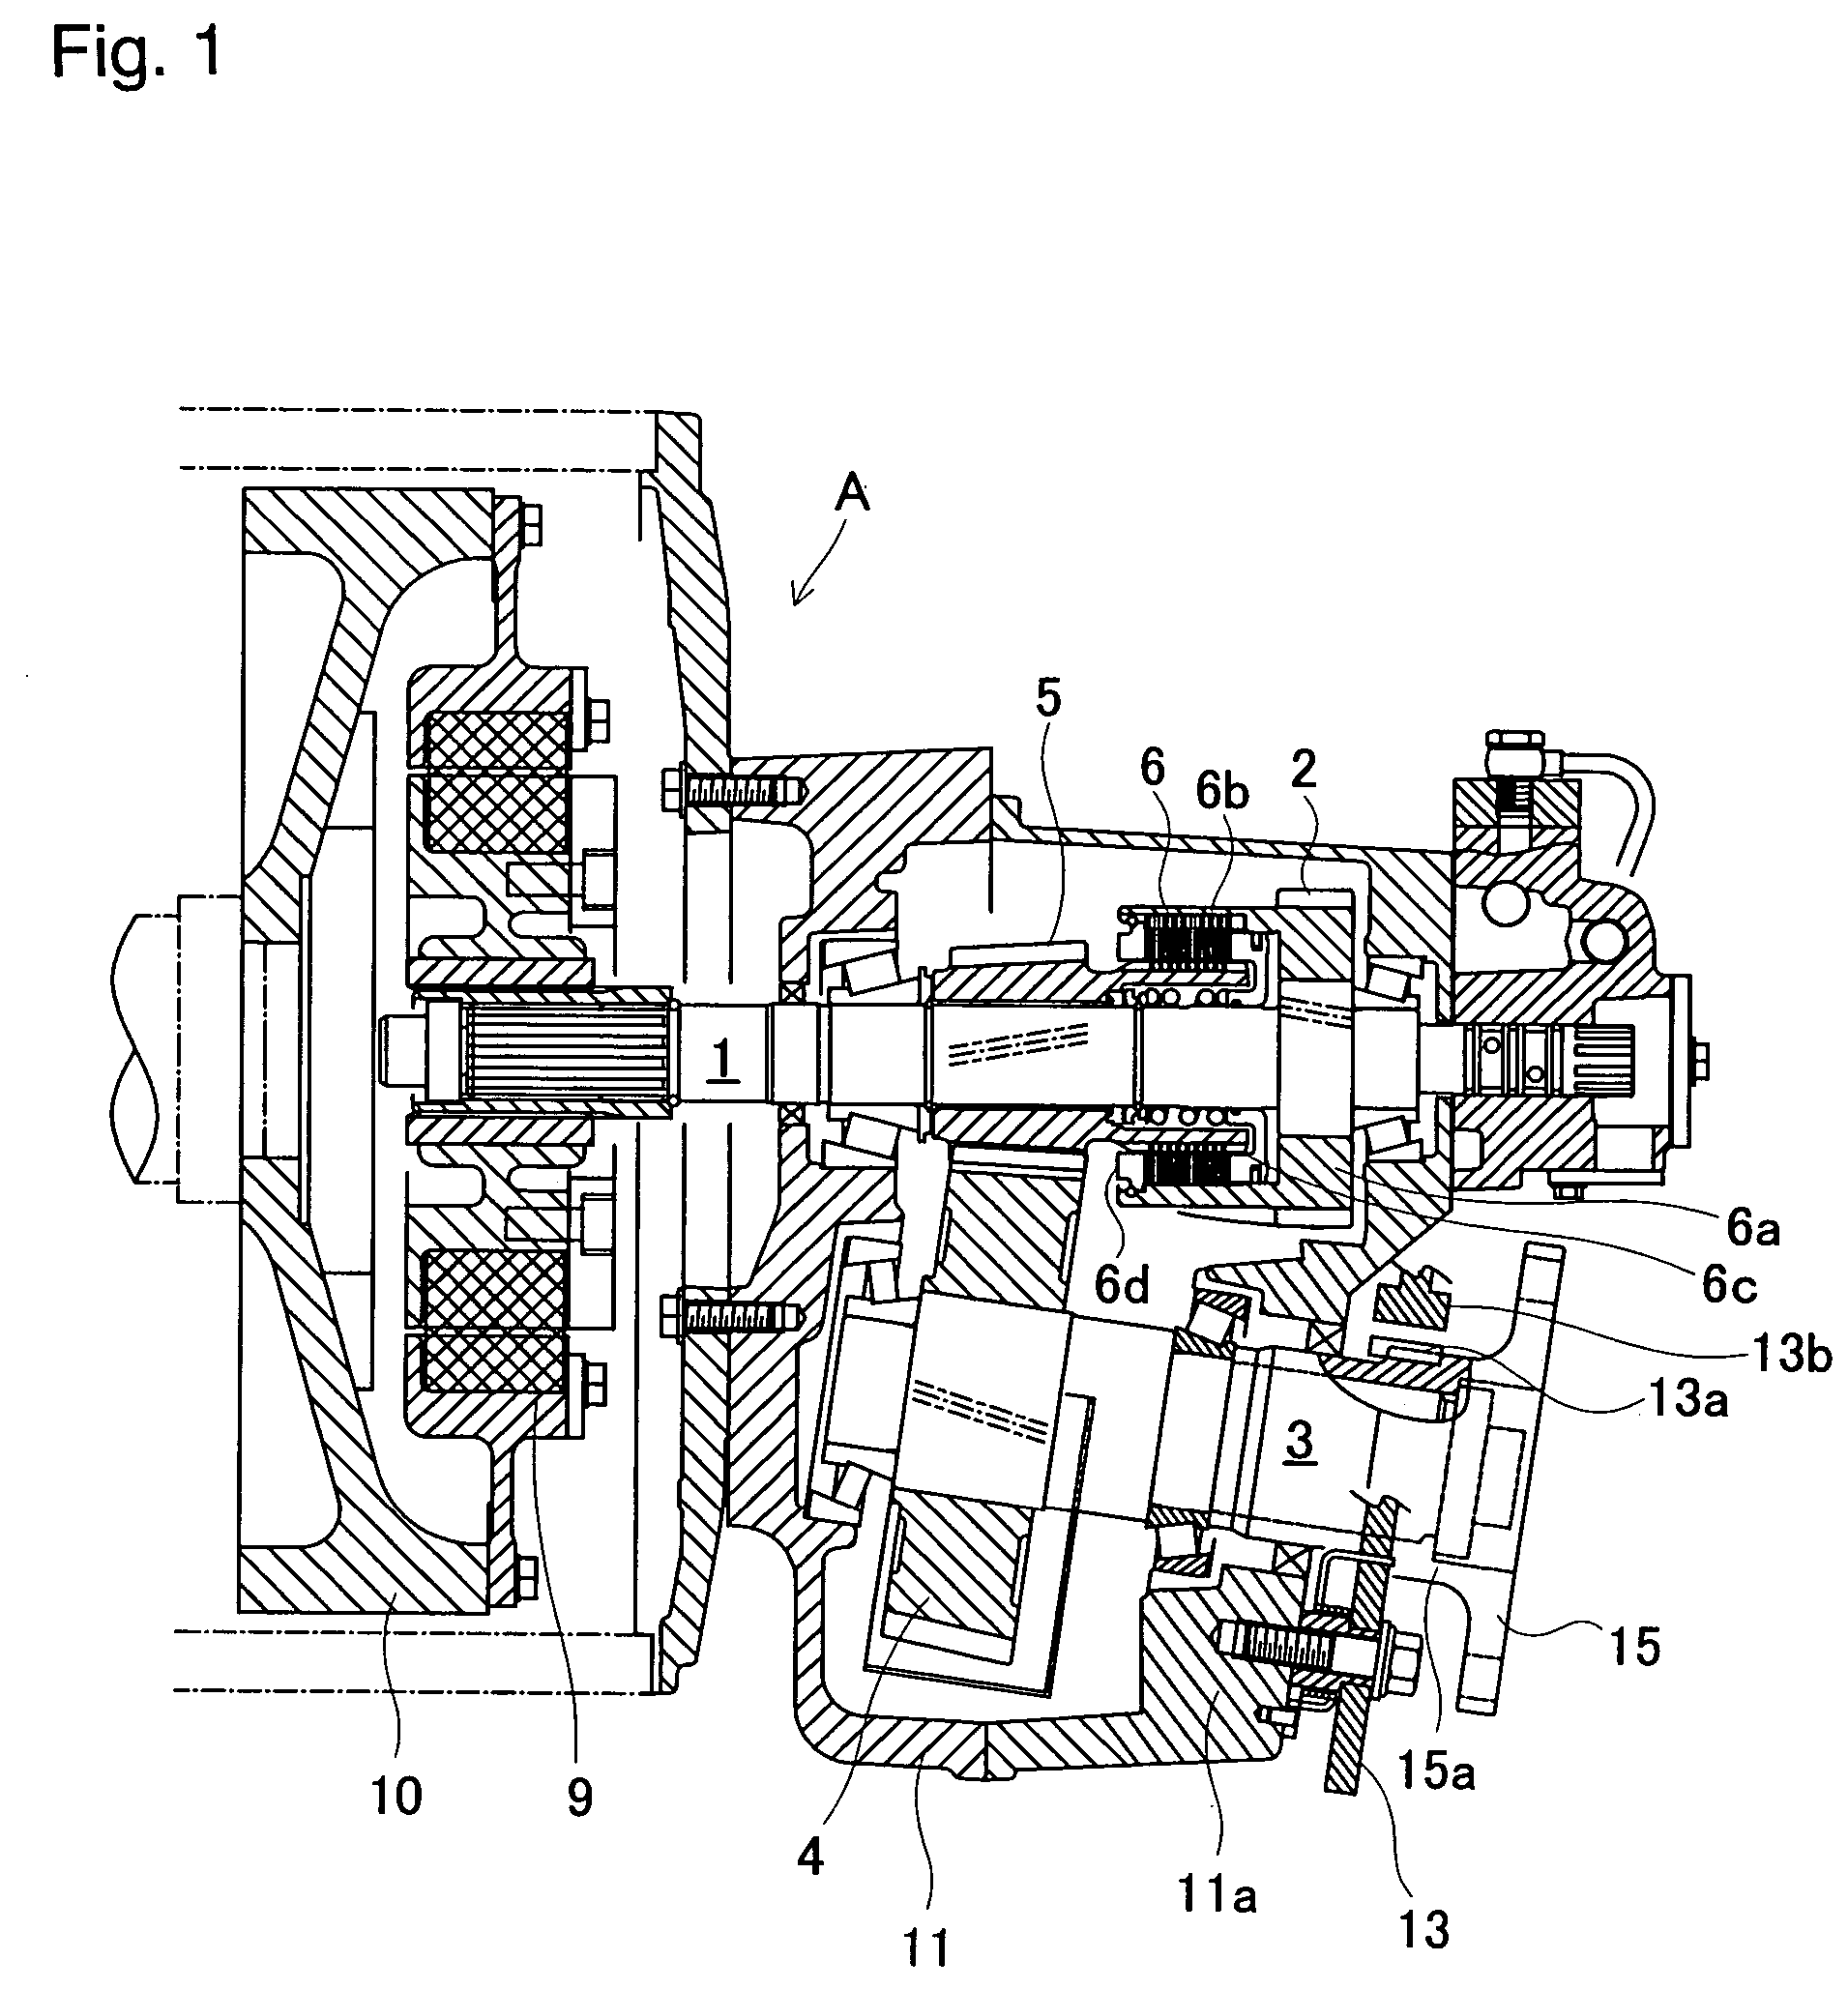 Marine reversing gear assembly provided with locking device